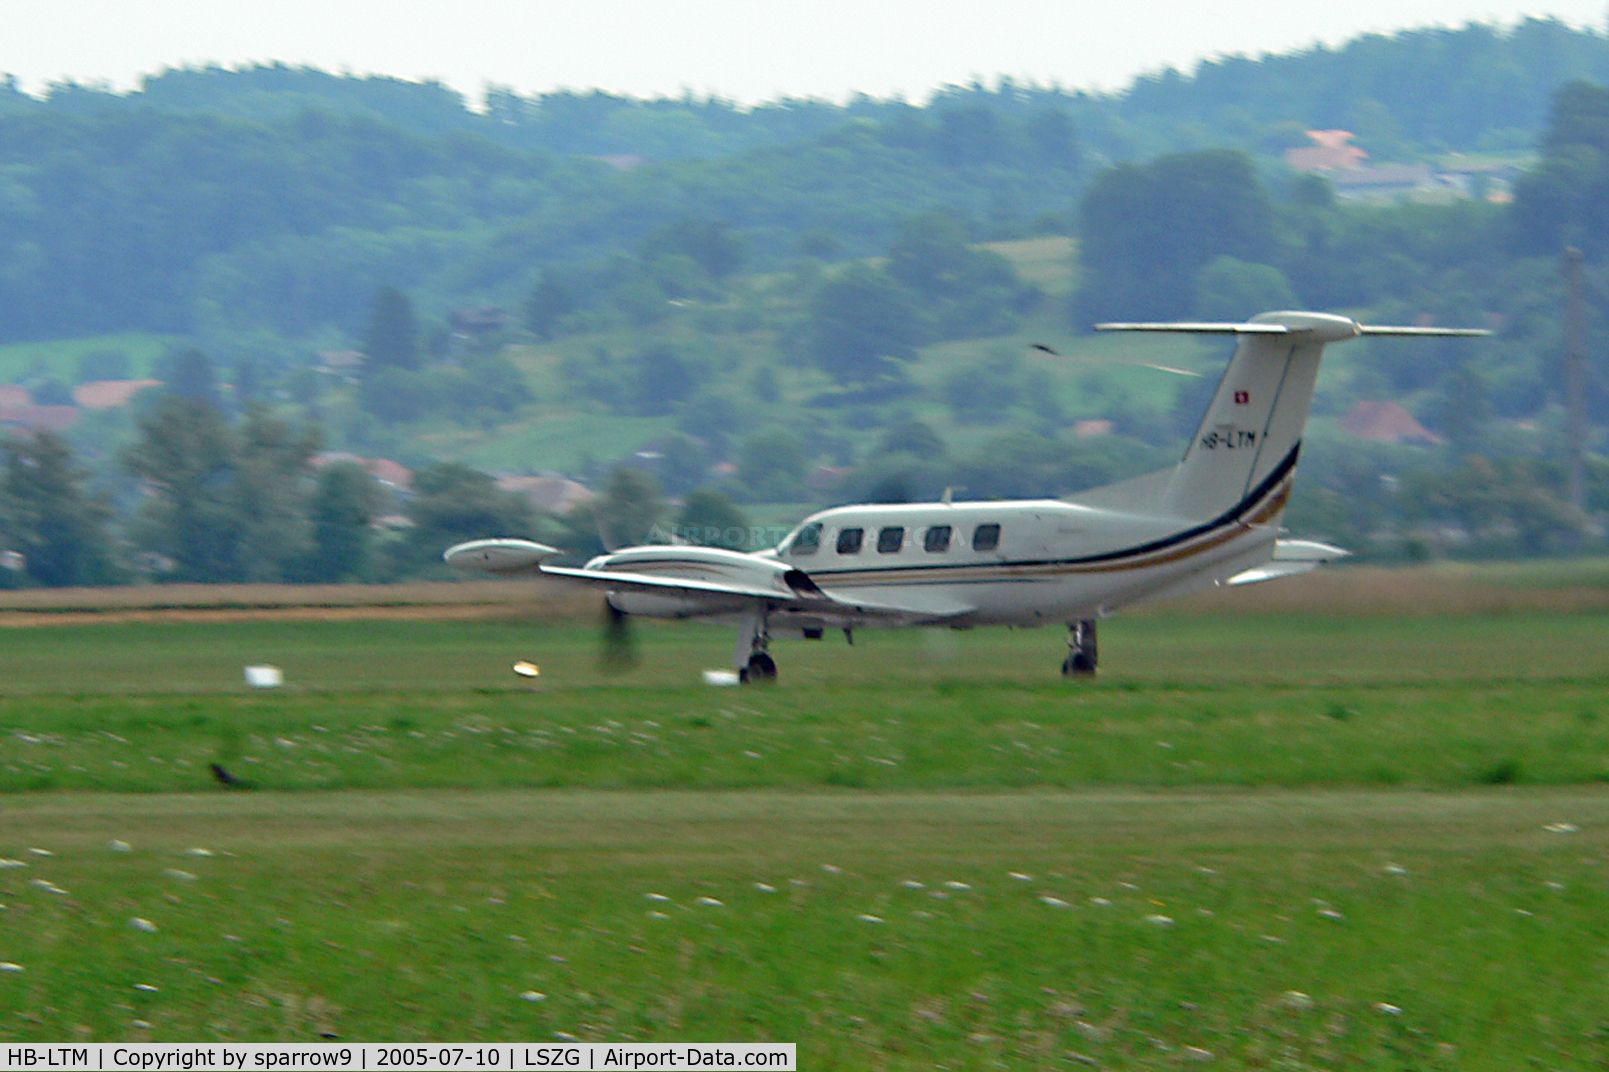 HB-LTM, 1985 Piper PA-42-1000 Cheyenne 400LS C/N 42-5527028, Runway 07 at Grenchen. HB-registered from 2002-07-02 until 2015-11-30.